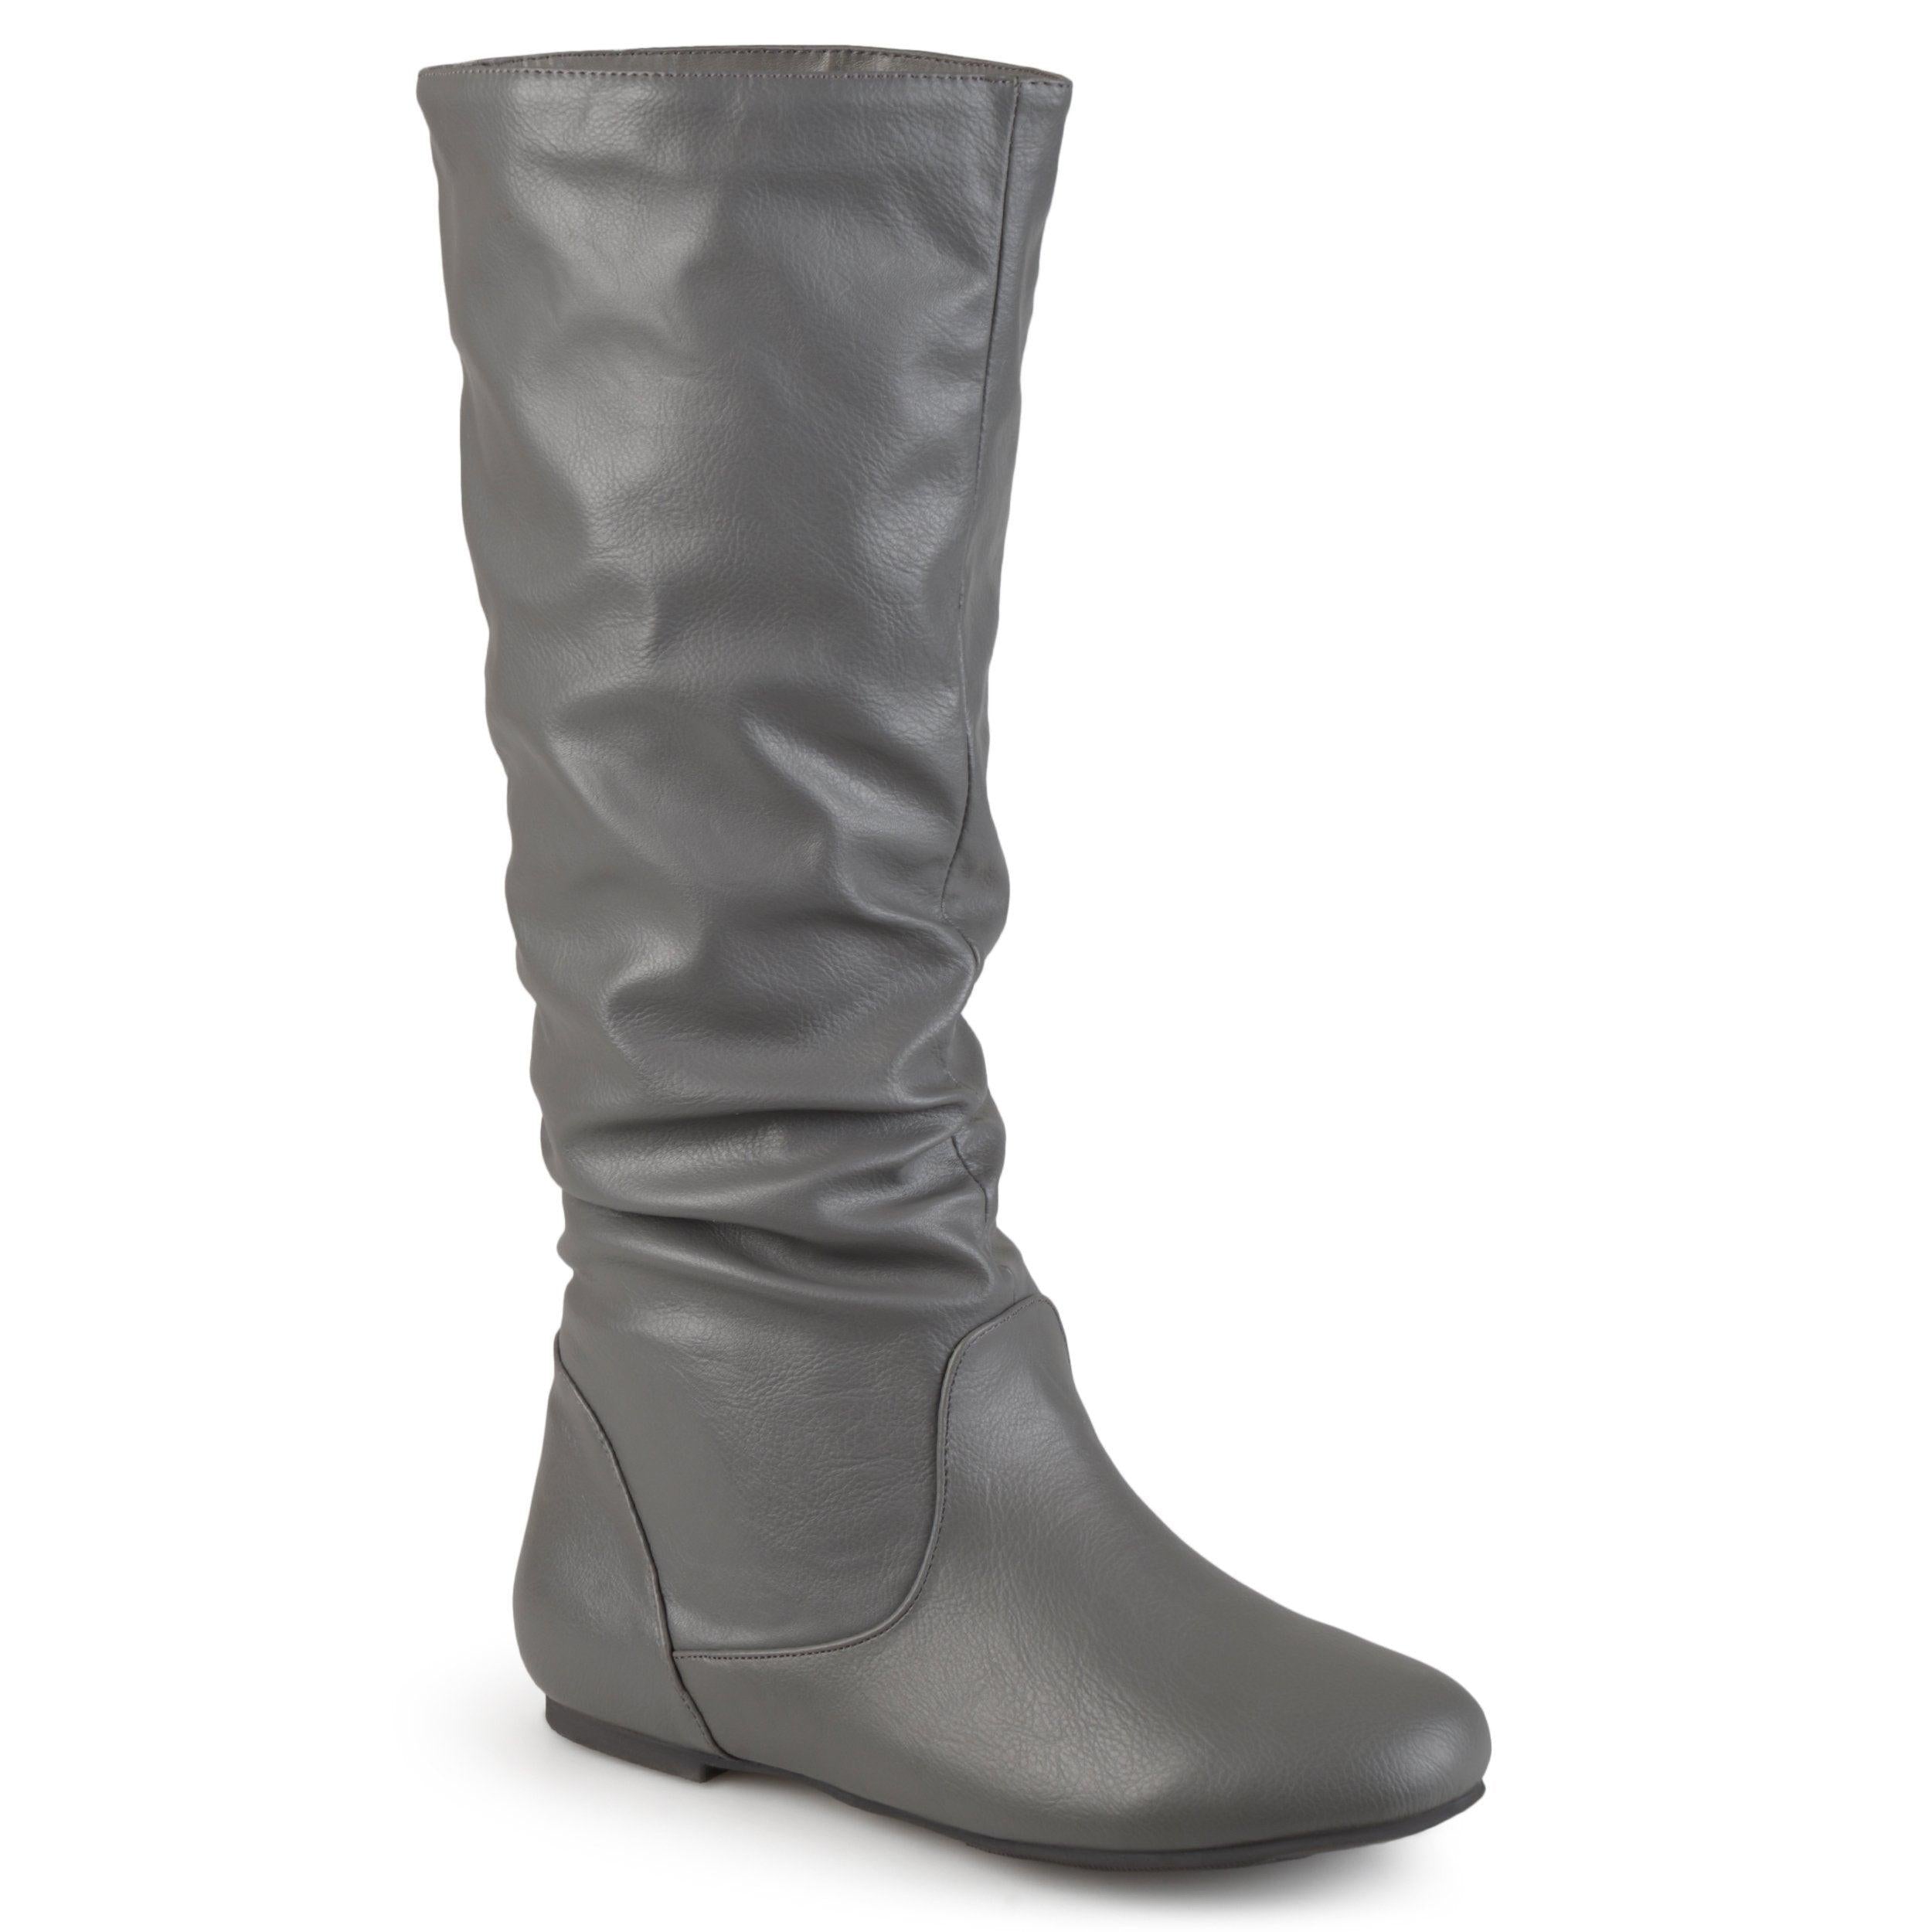 Jayne Booties | Women's Flat Riding Boots | Journee Collection